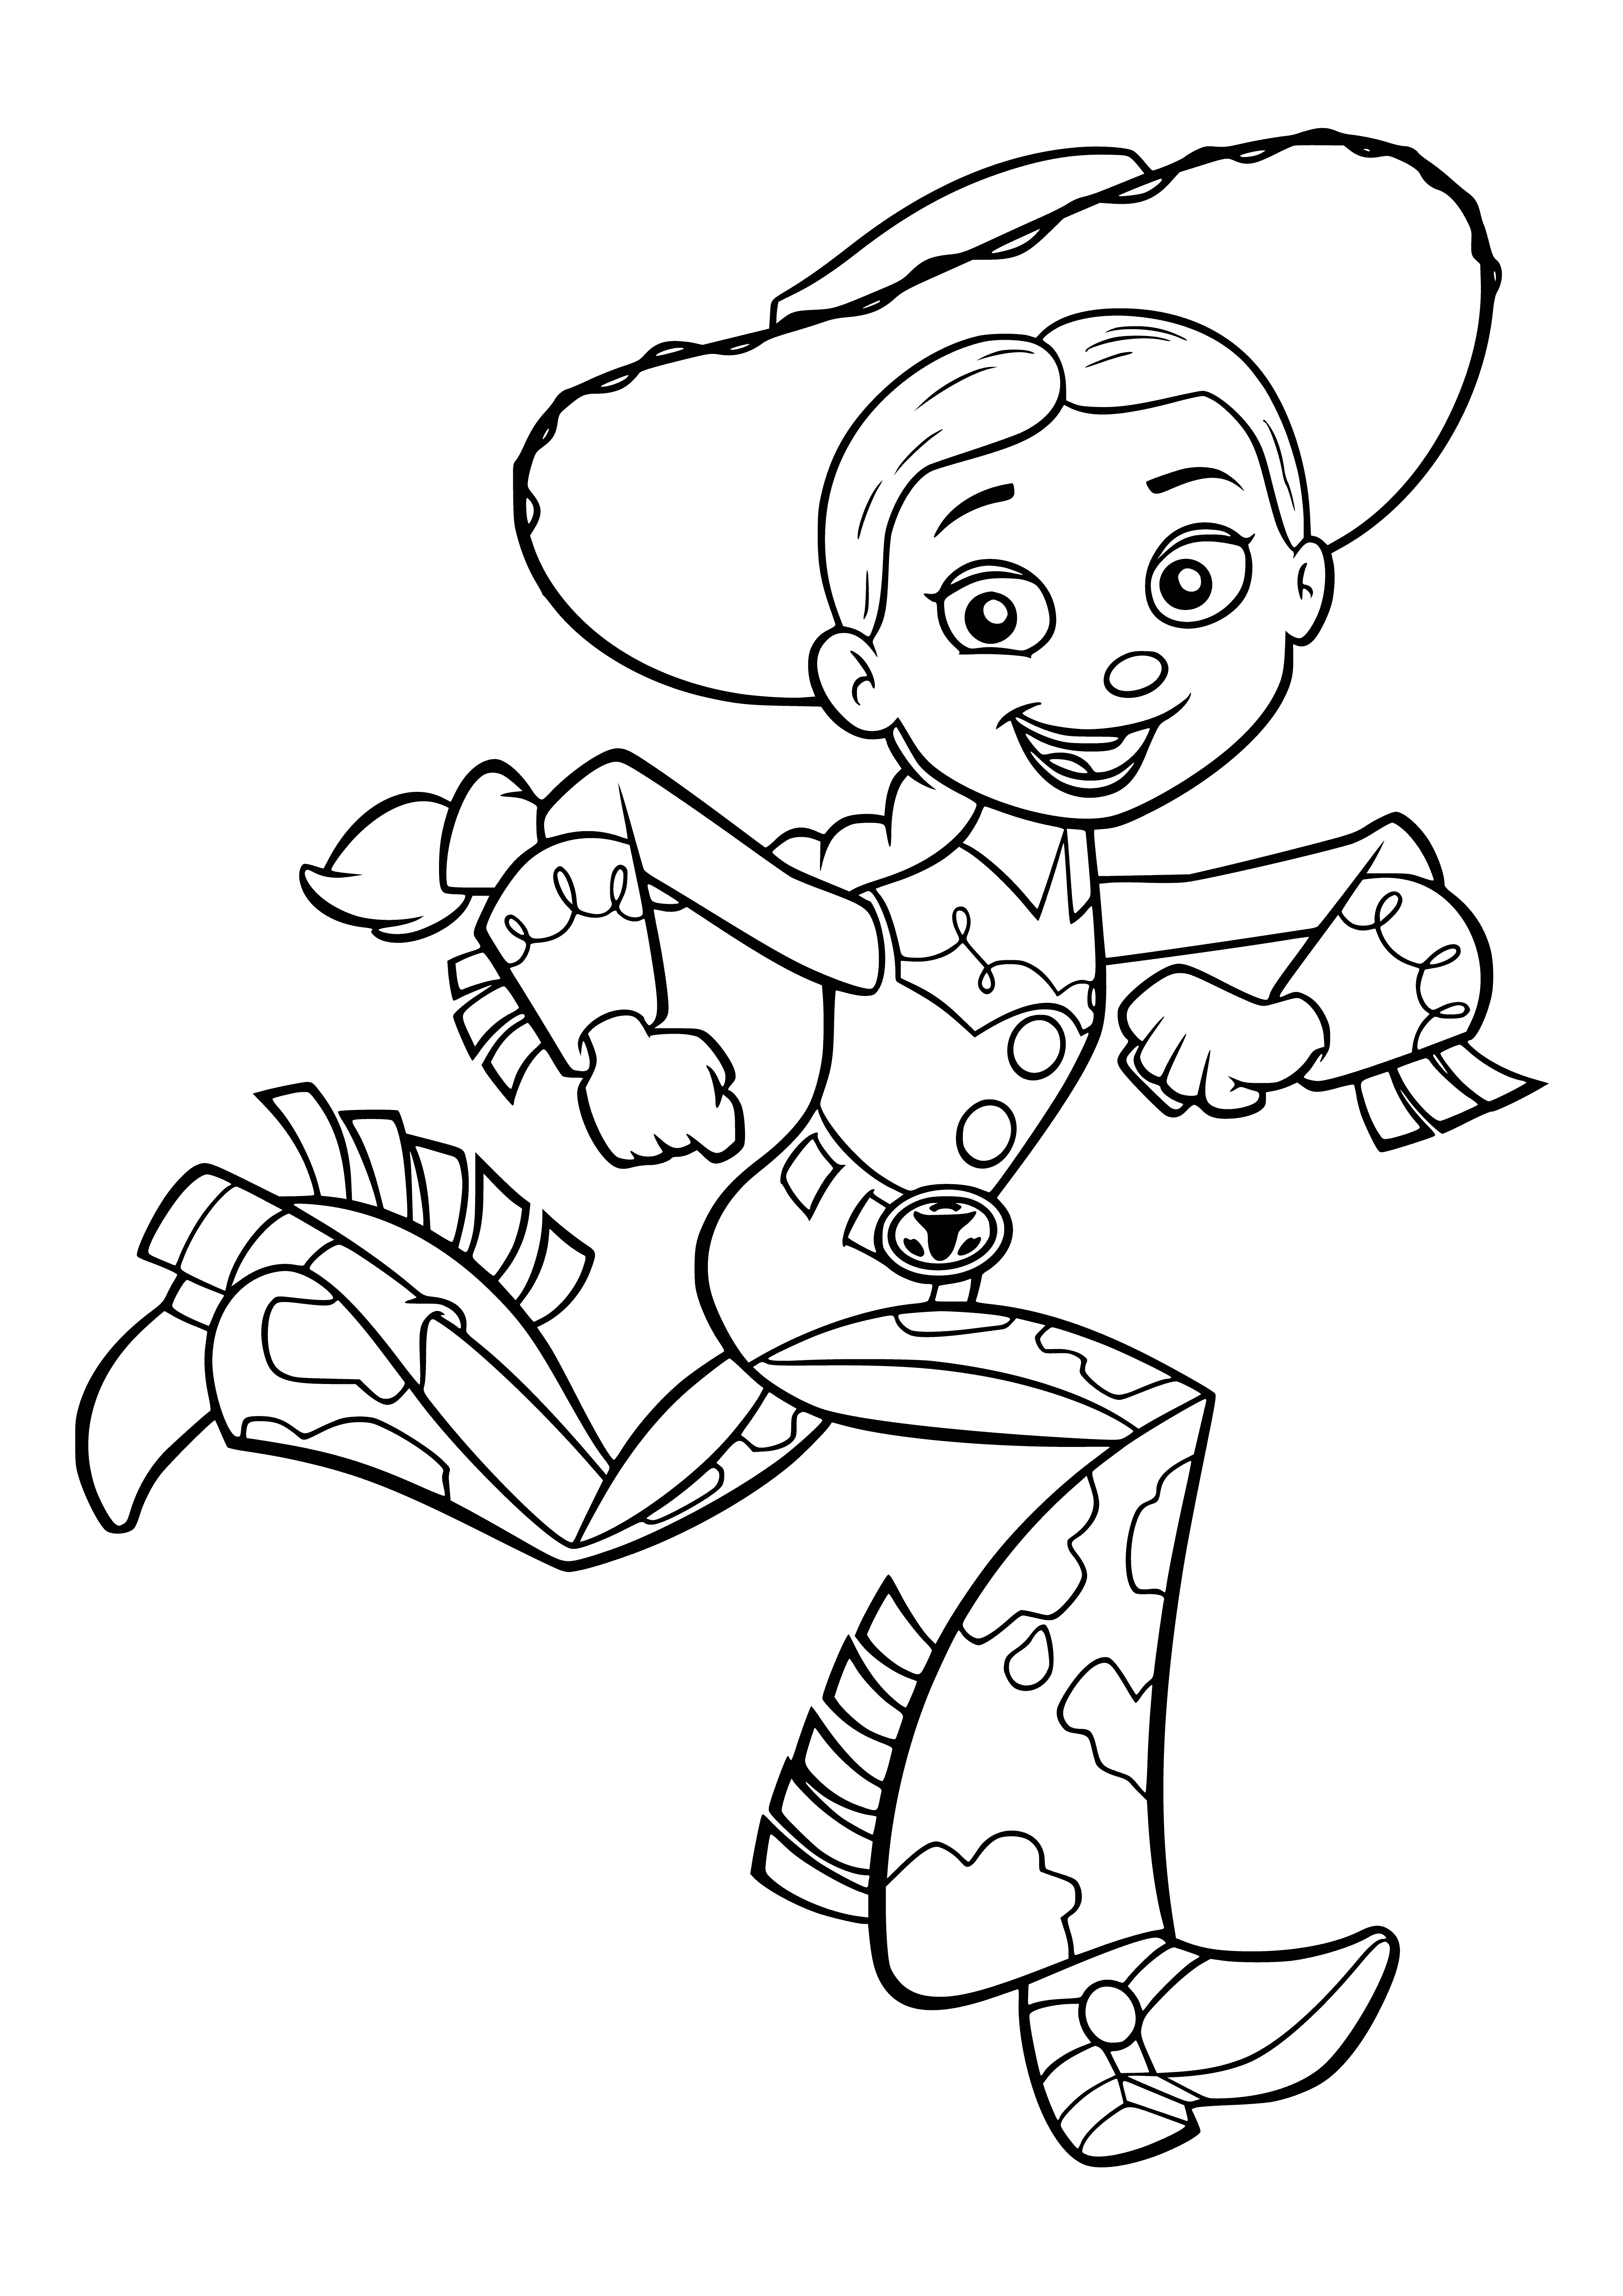 coloring page: Girl with red hair in cowgirl outfit, holding brown lasso, standing in front of brown horse.